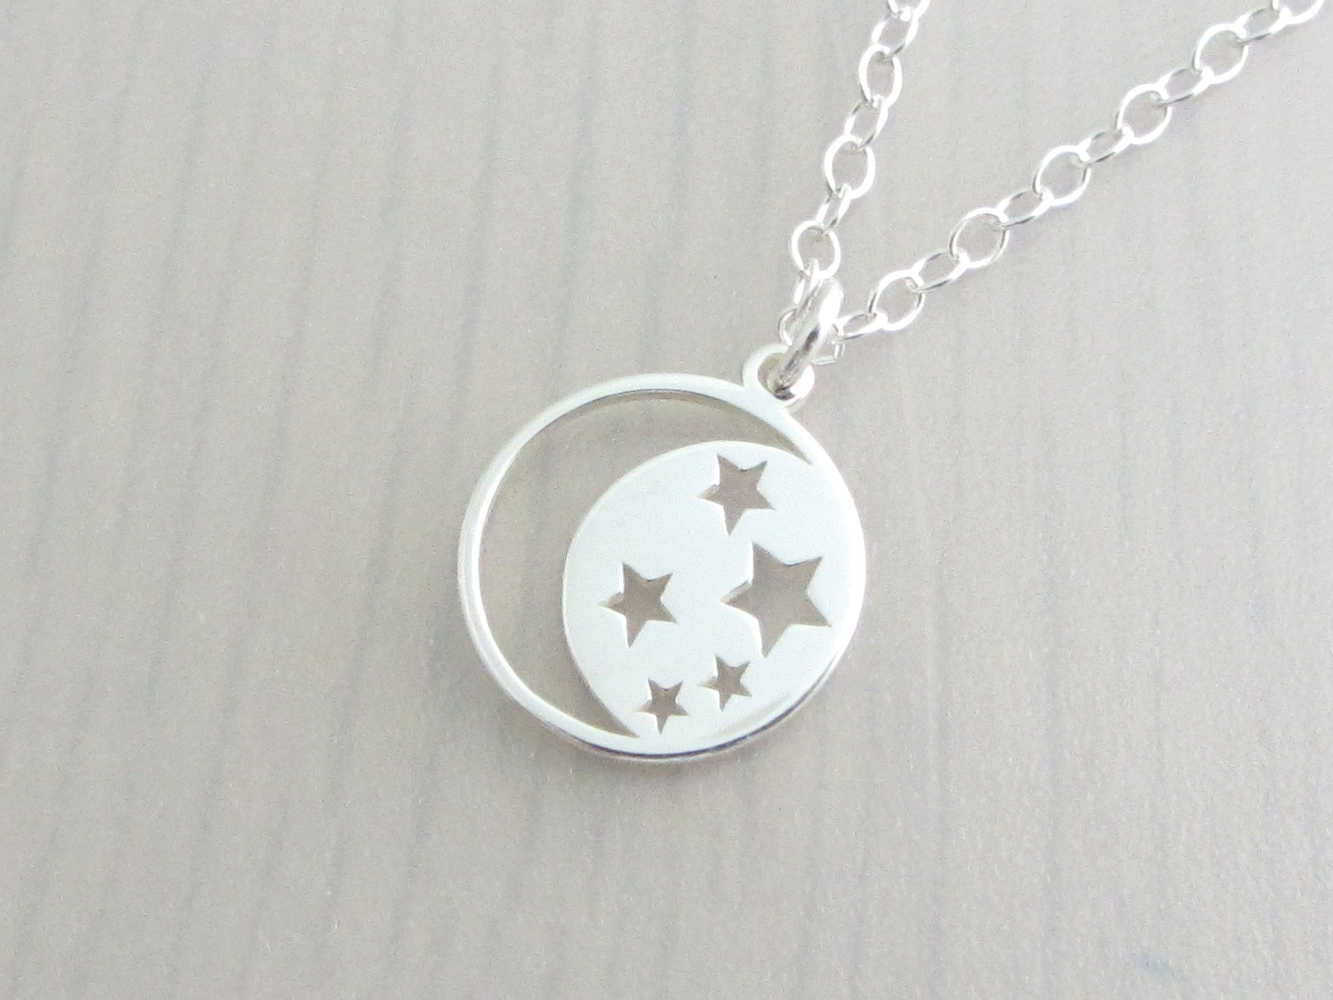 silver crescent moon with cut out stars charm on a silver chain